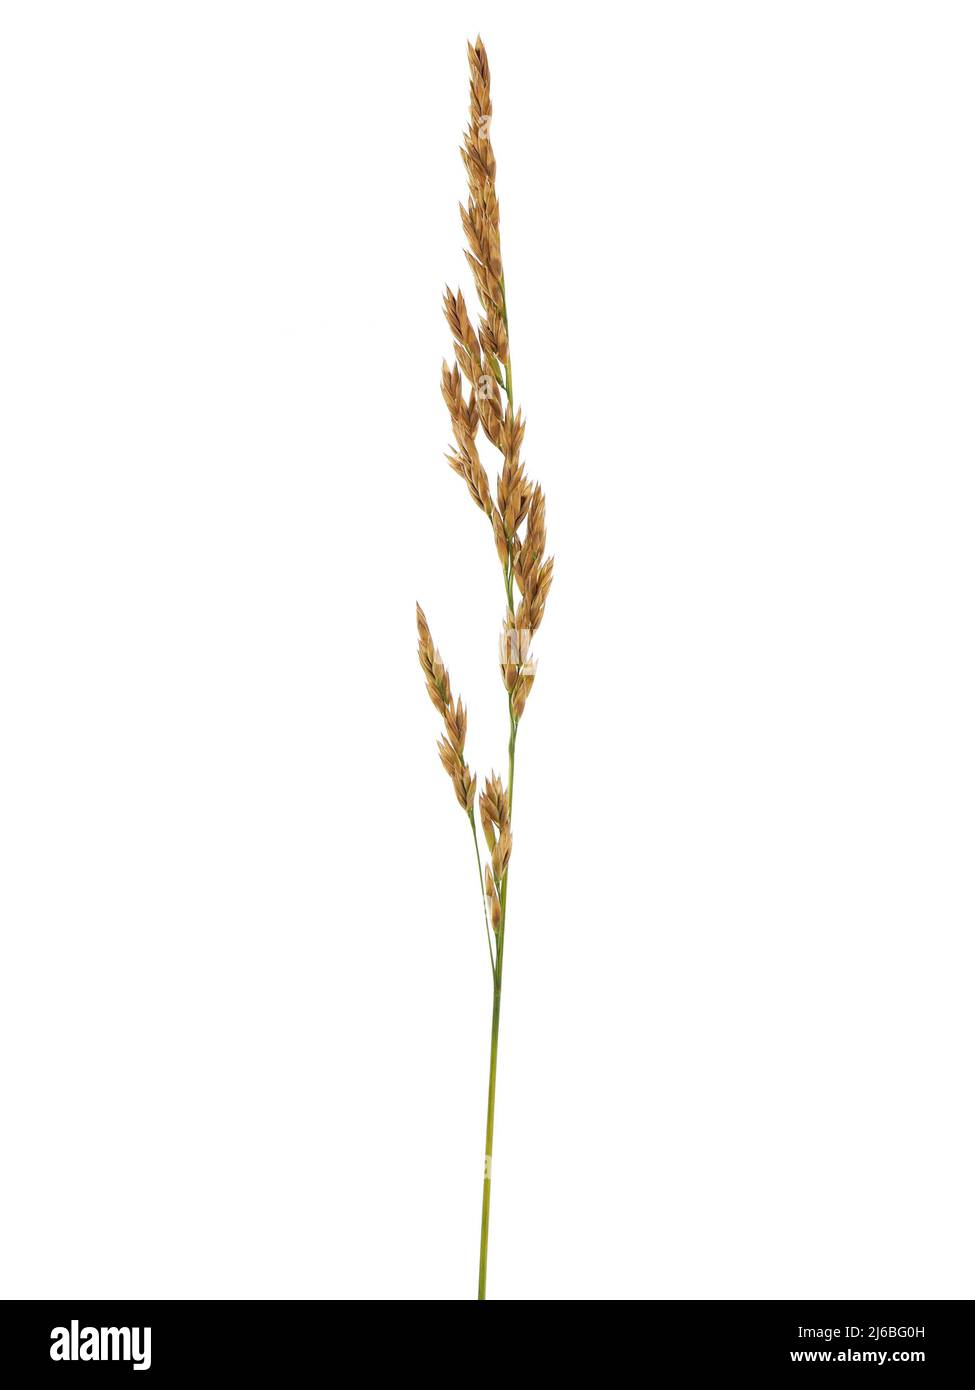 Ear of grass isolated on white background Stock Photo